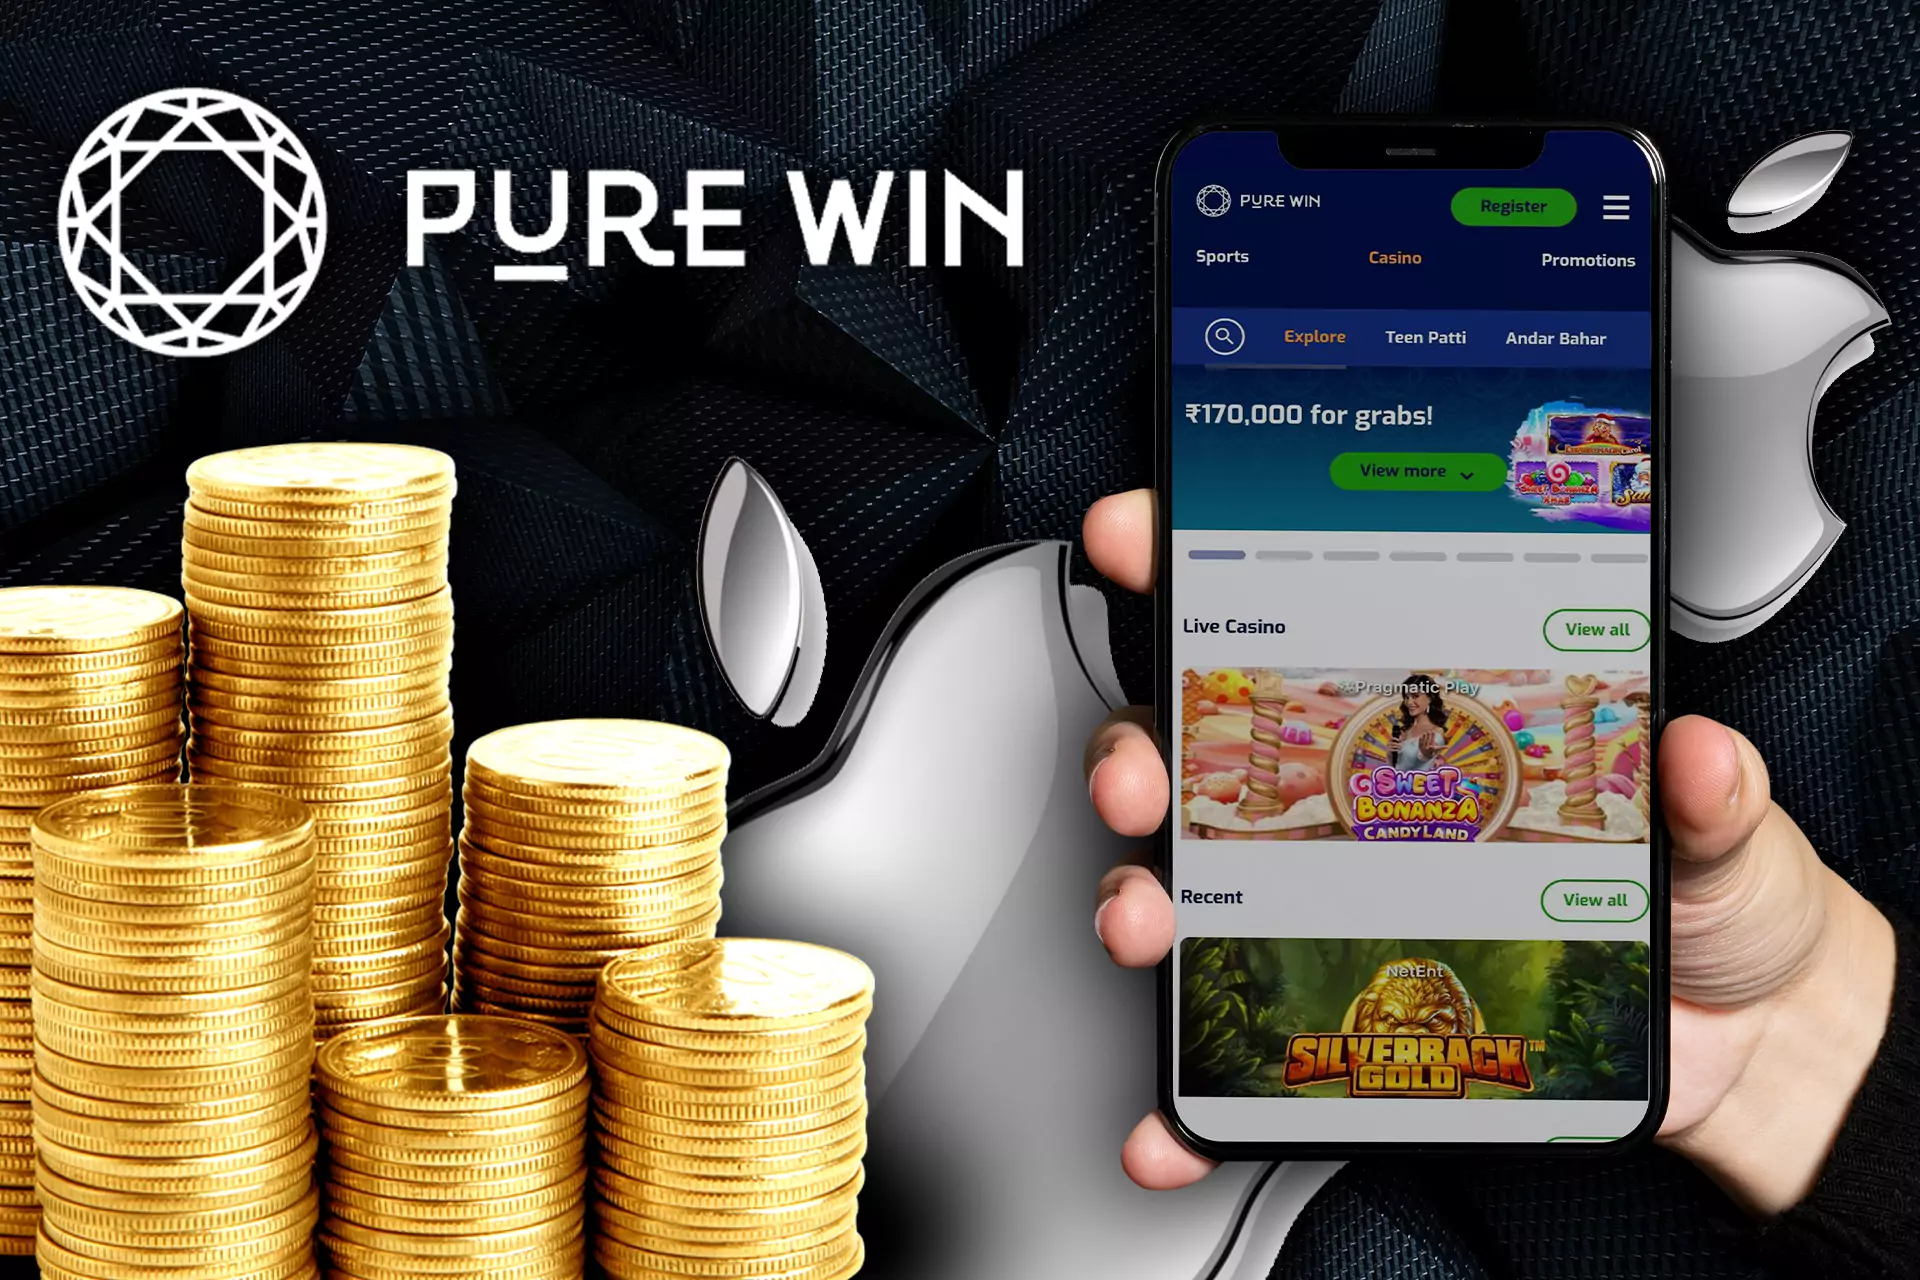 The Pure Casino app is available for free download on iOS.